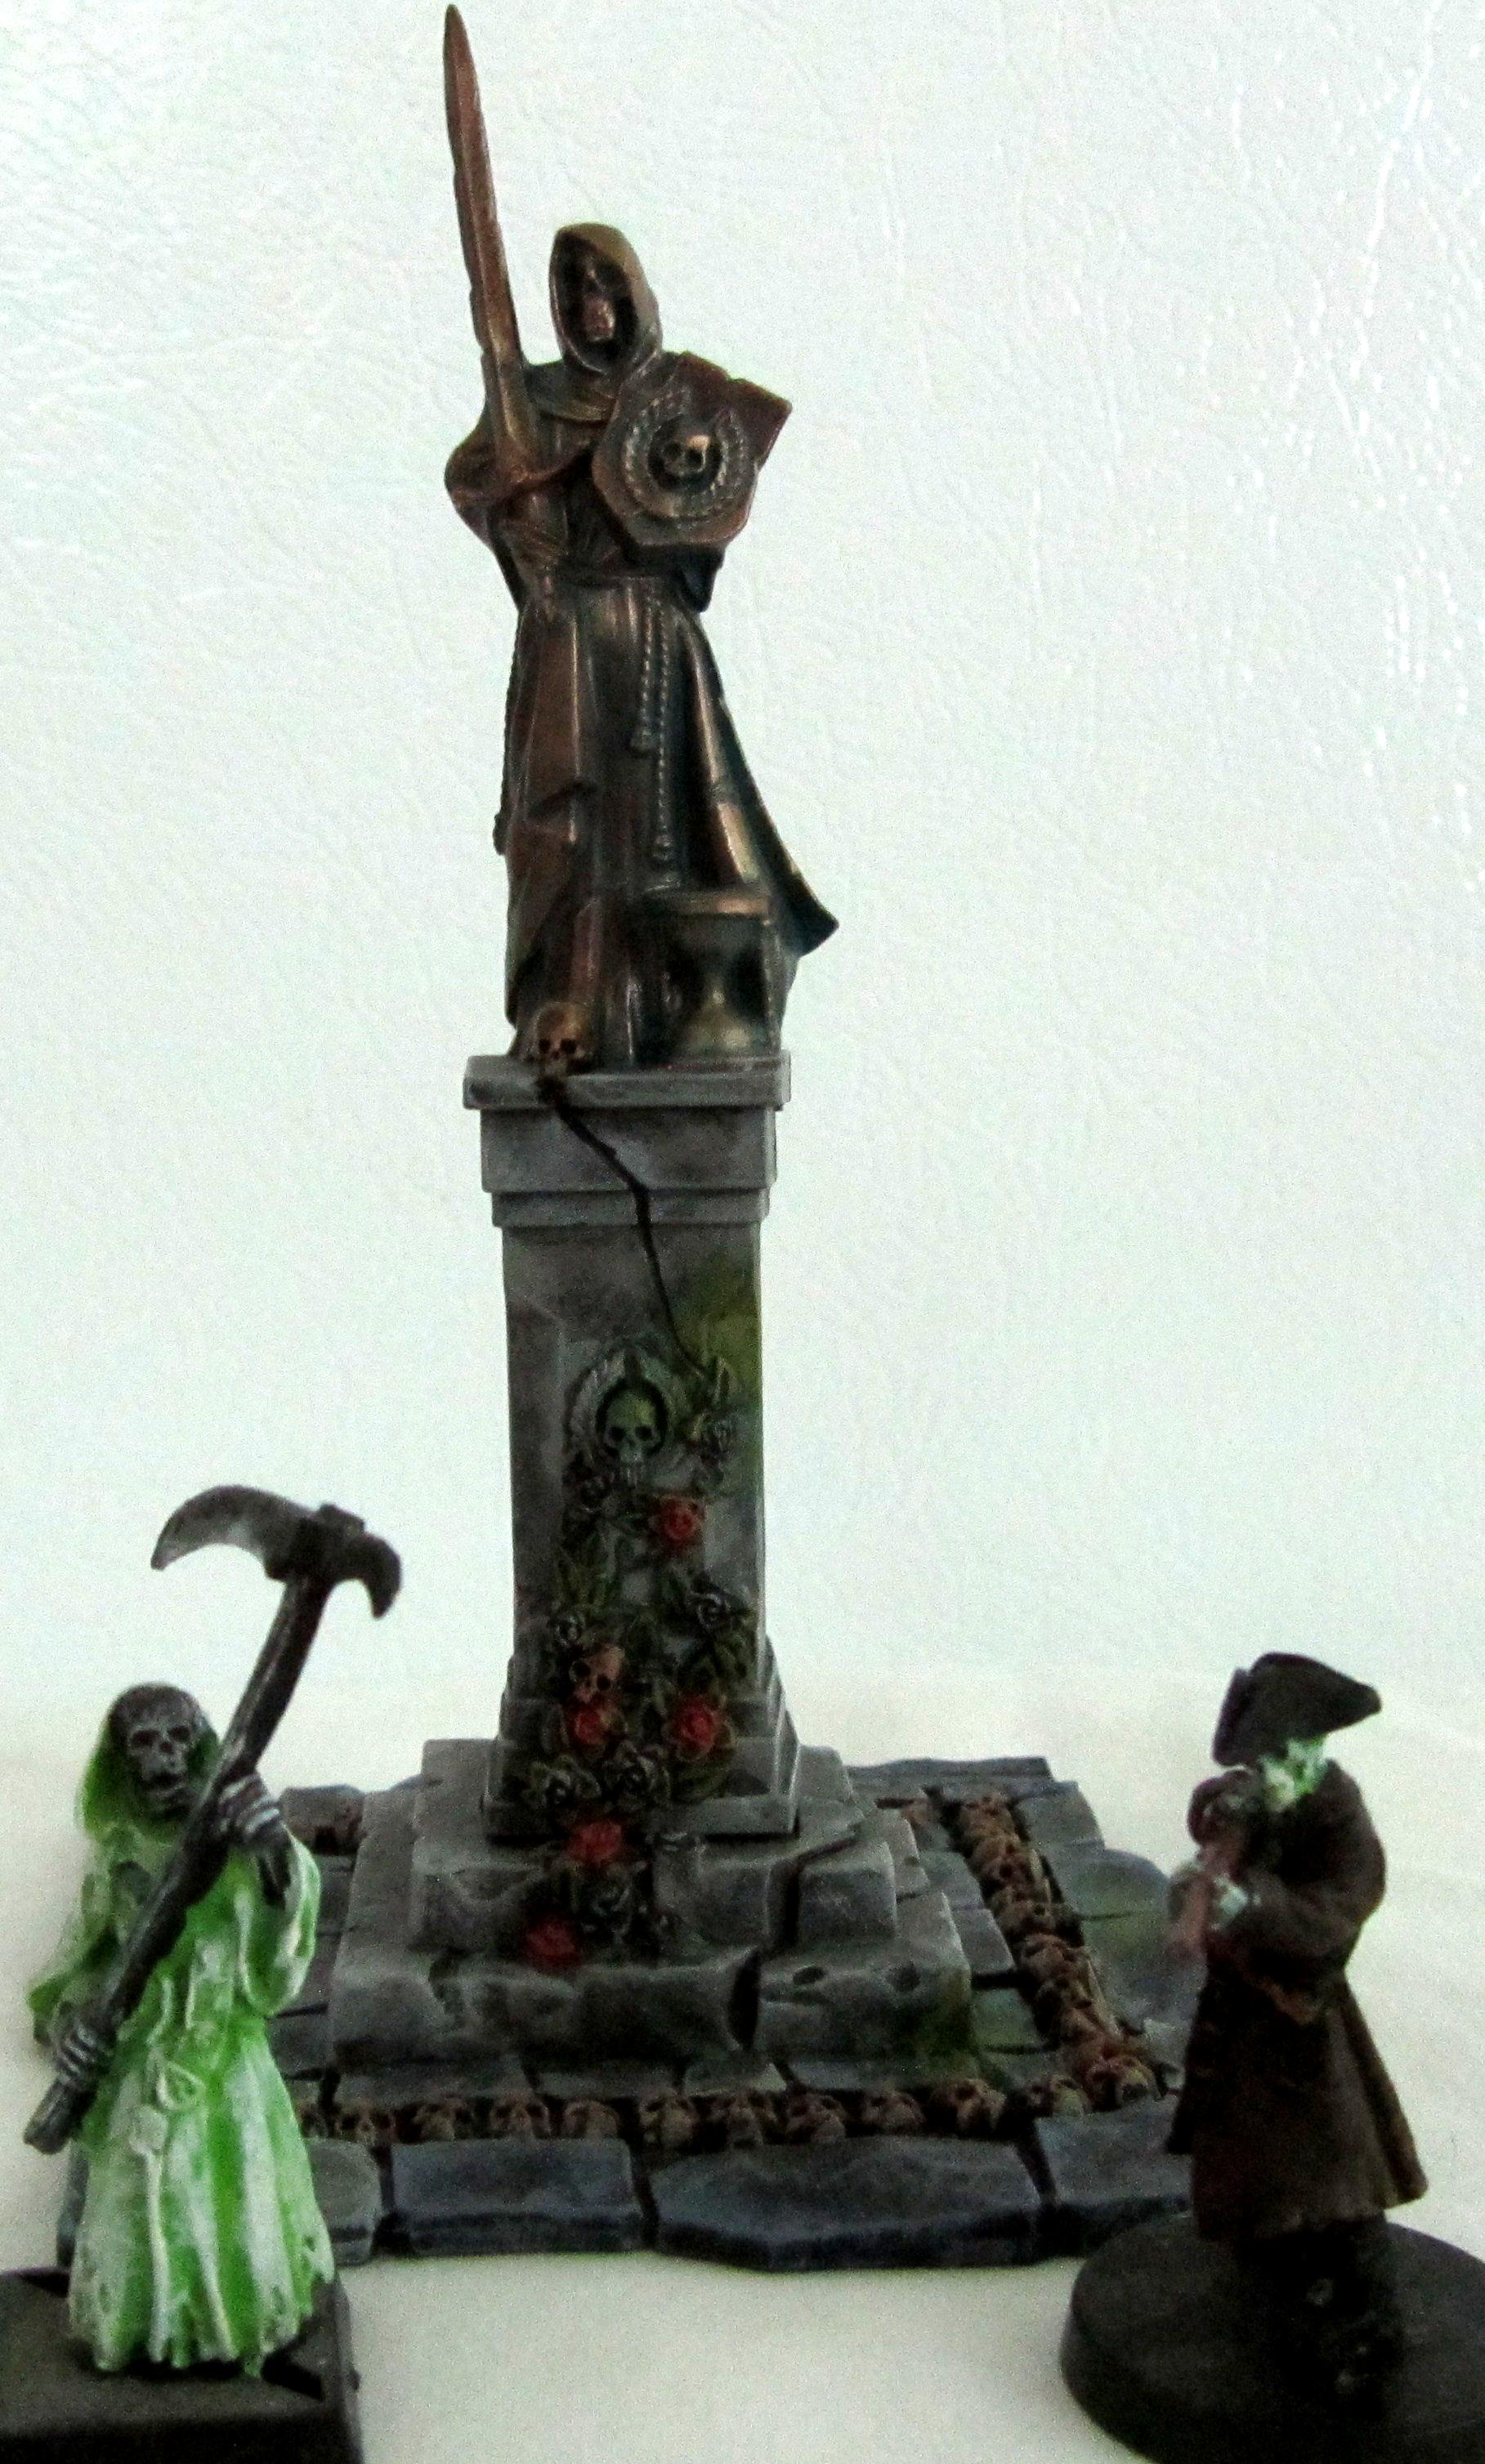 Crypt, Garden, Ghost, Grave, Graveyard, Haunted, Morr, Pirate, Skeletons, Tomb